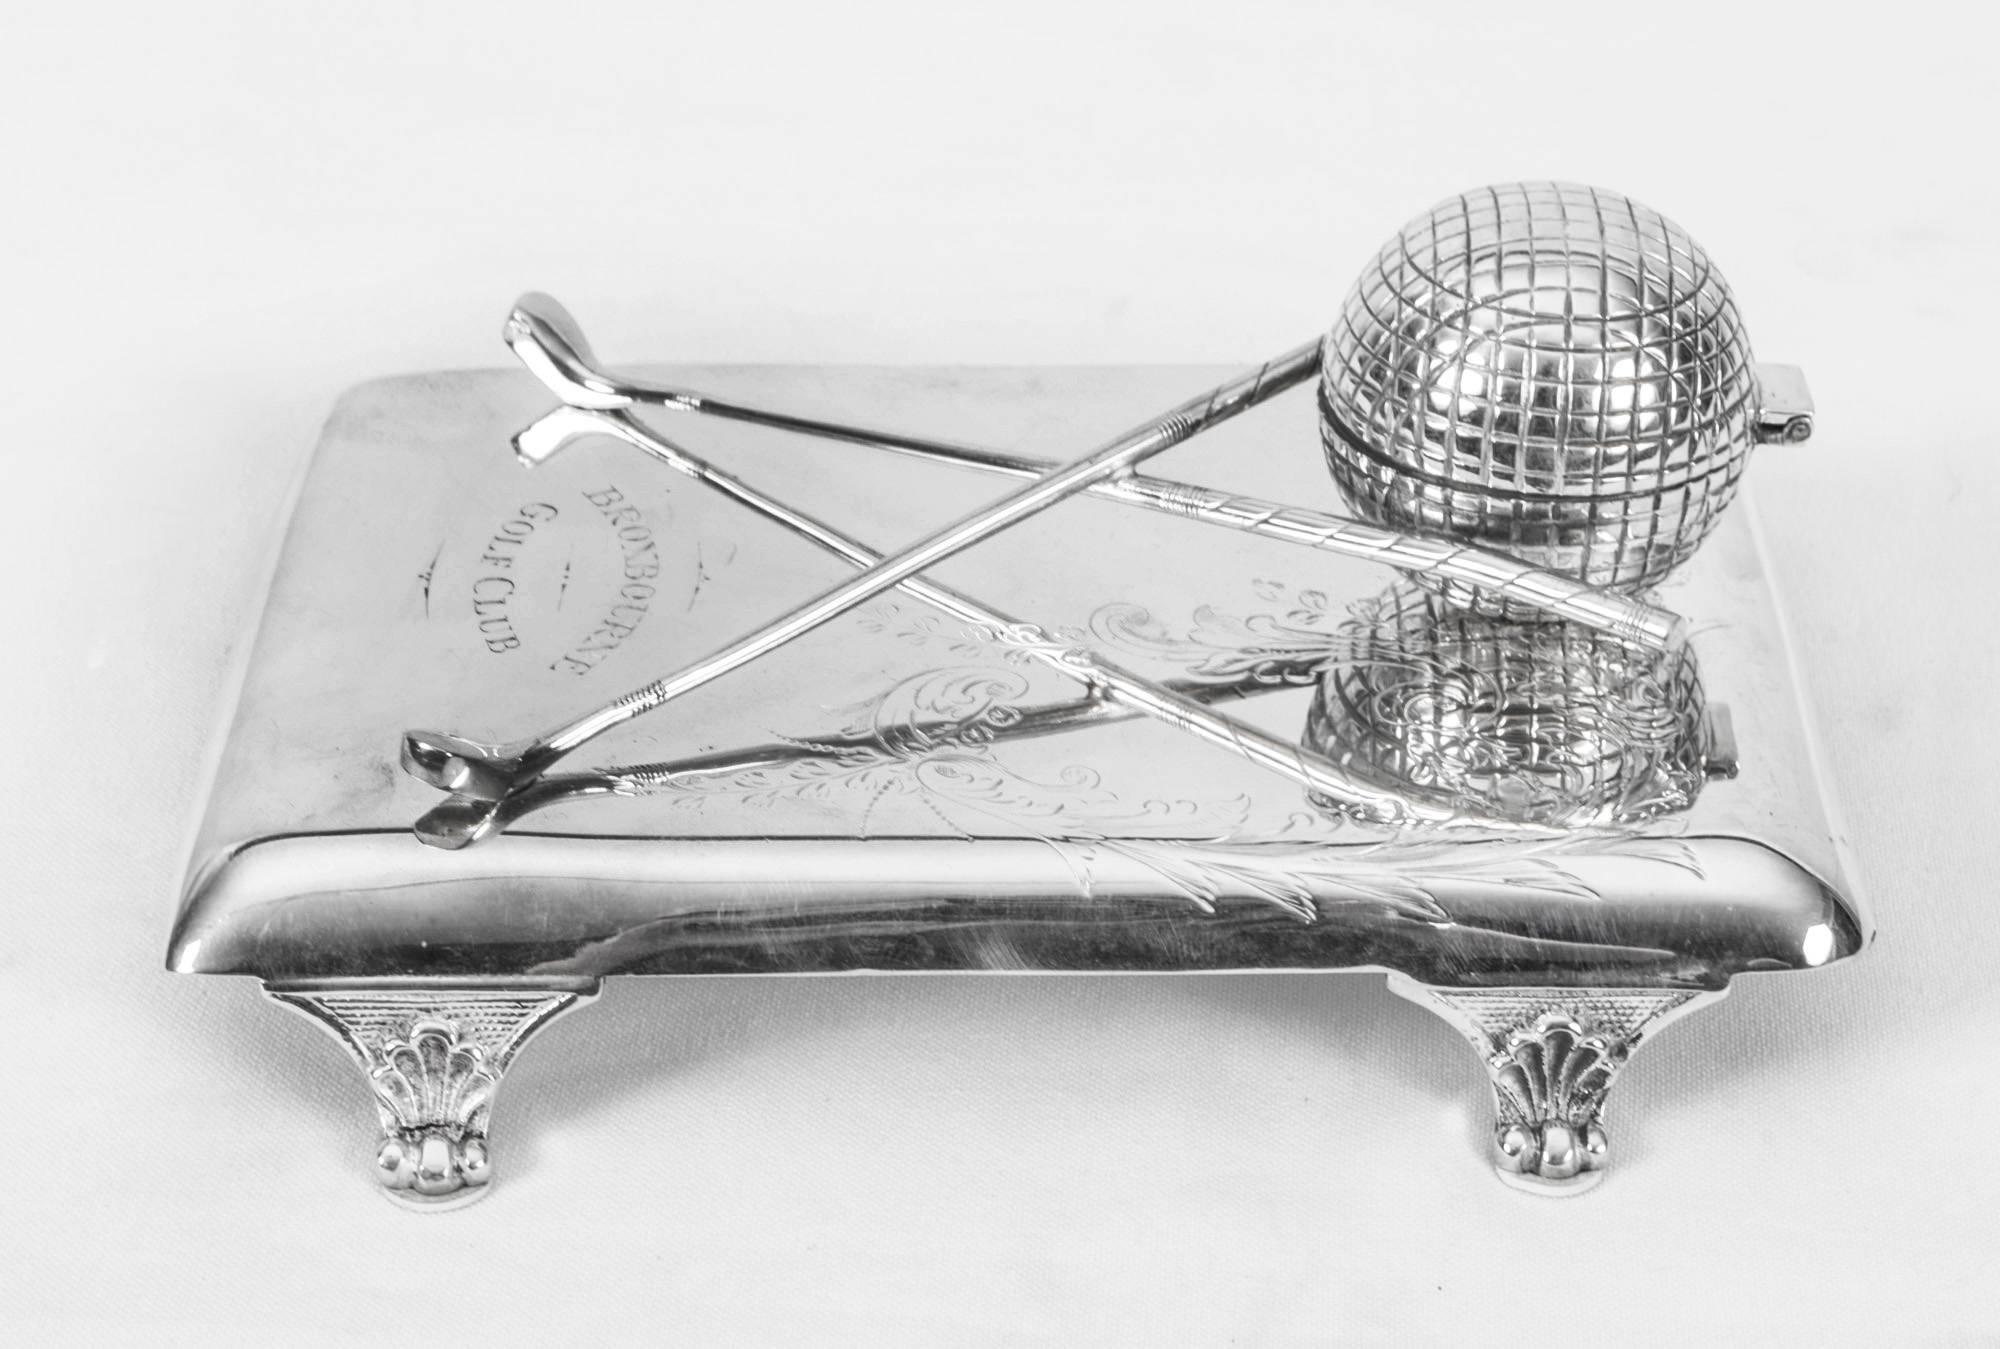 This is a novelty antique Edwardian silver plated inkwell made by Hamilton Laidlaw & Company, circa 1900. 
The inkwell features a golf ball with liner for the ink and a pair of crossed golf clubs. The plateau is beautifully engraved with